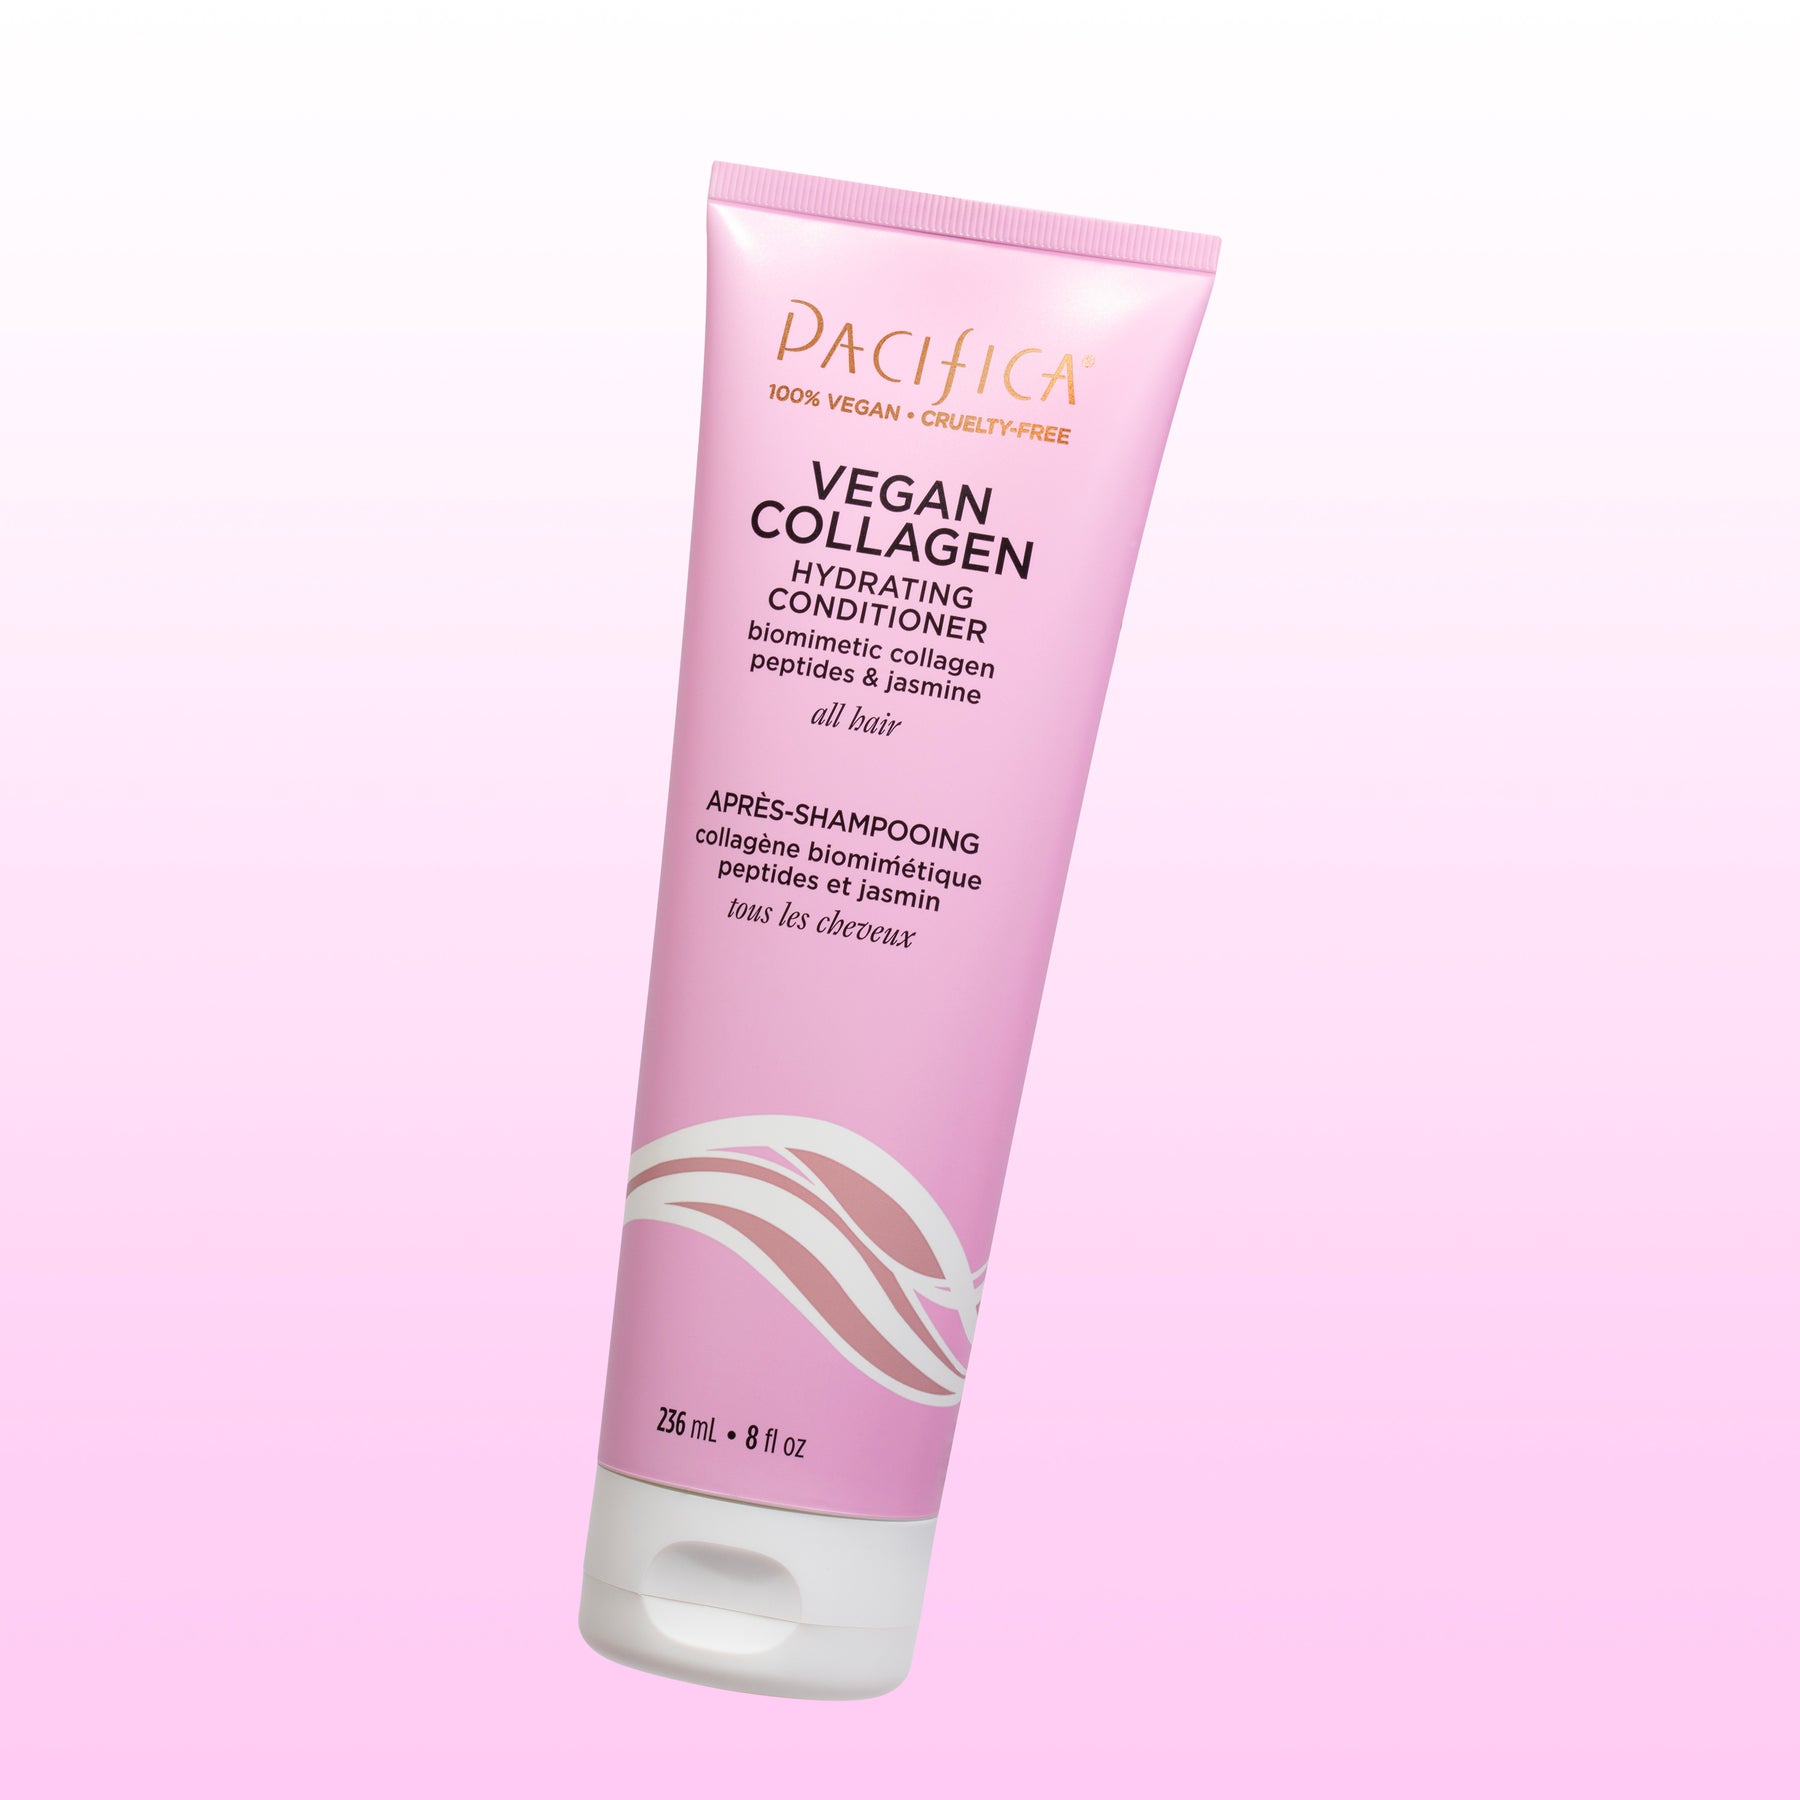 Vegan Collagen Hydrating Conditioner - Haircare - Pacifica Beauty